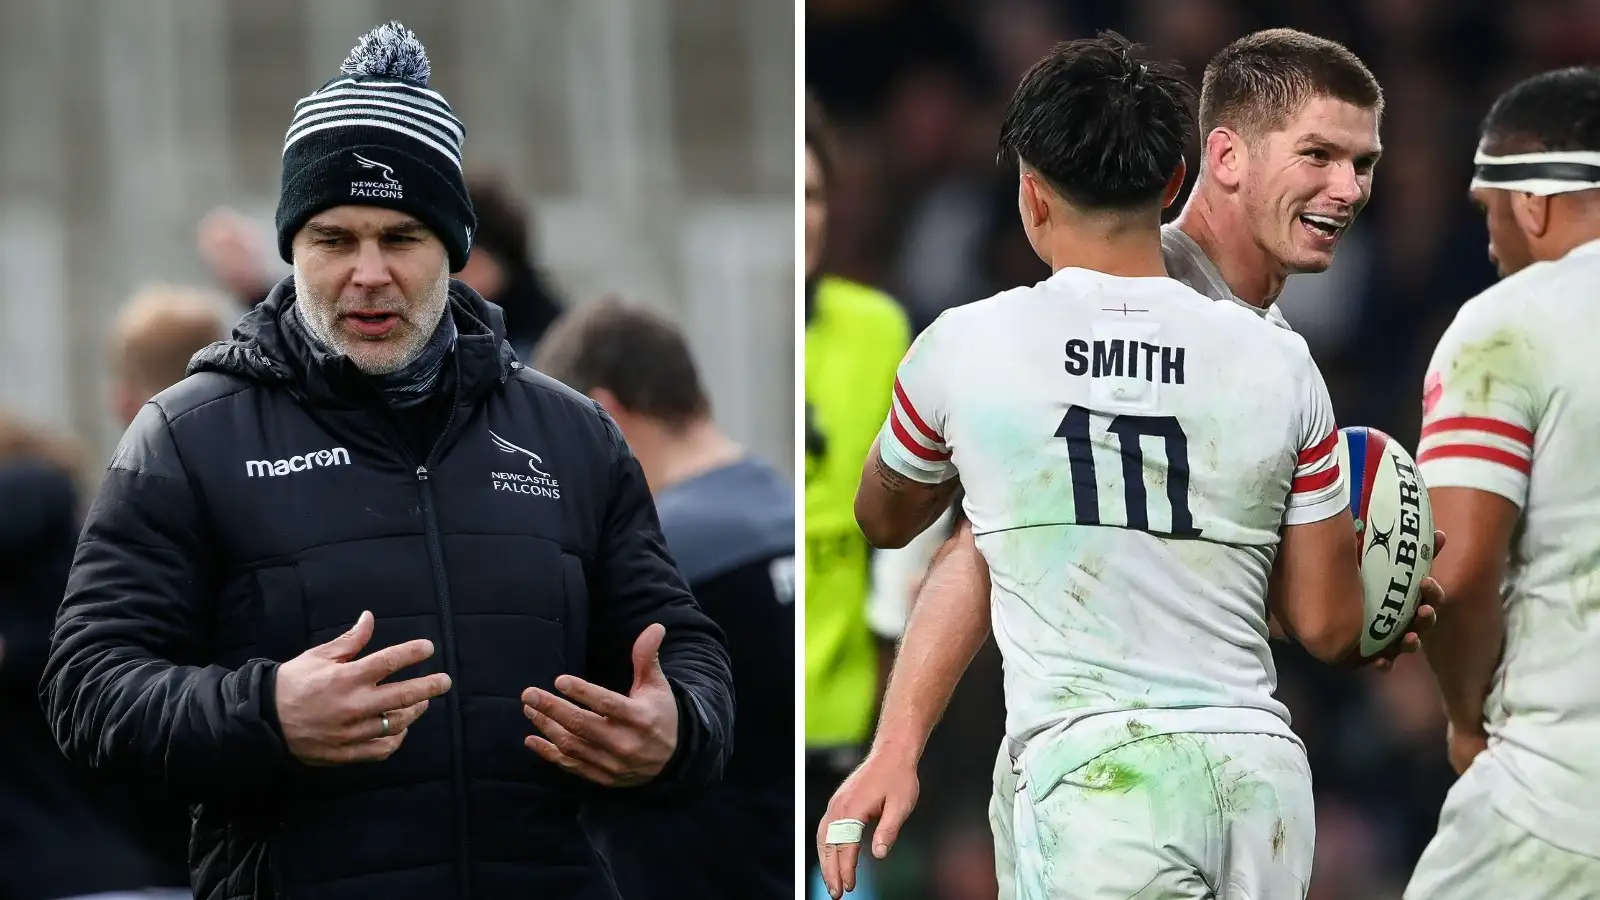 Six Nations: With Steve Borthwick set to announce his chosen 36-man squad on Monday morning, former England number eight and ex-Worcester Warriors defence coach Nick Easter spends a morning playing selector, with balance and Premiership form at the top of his thinking.